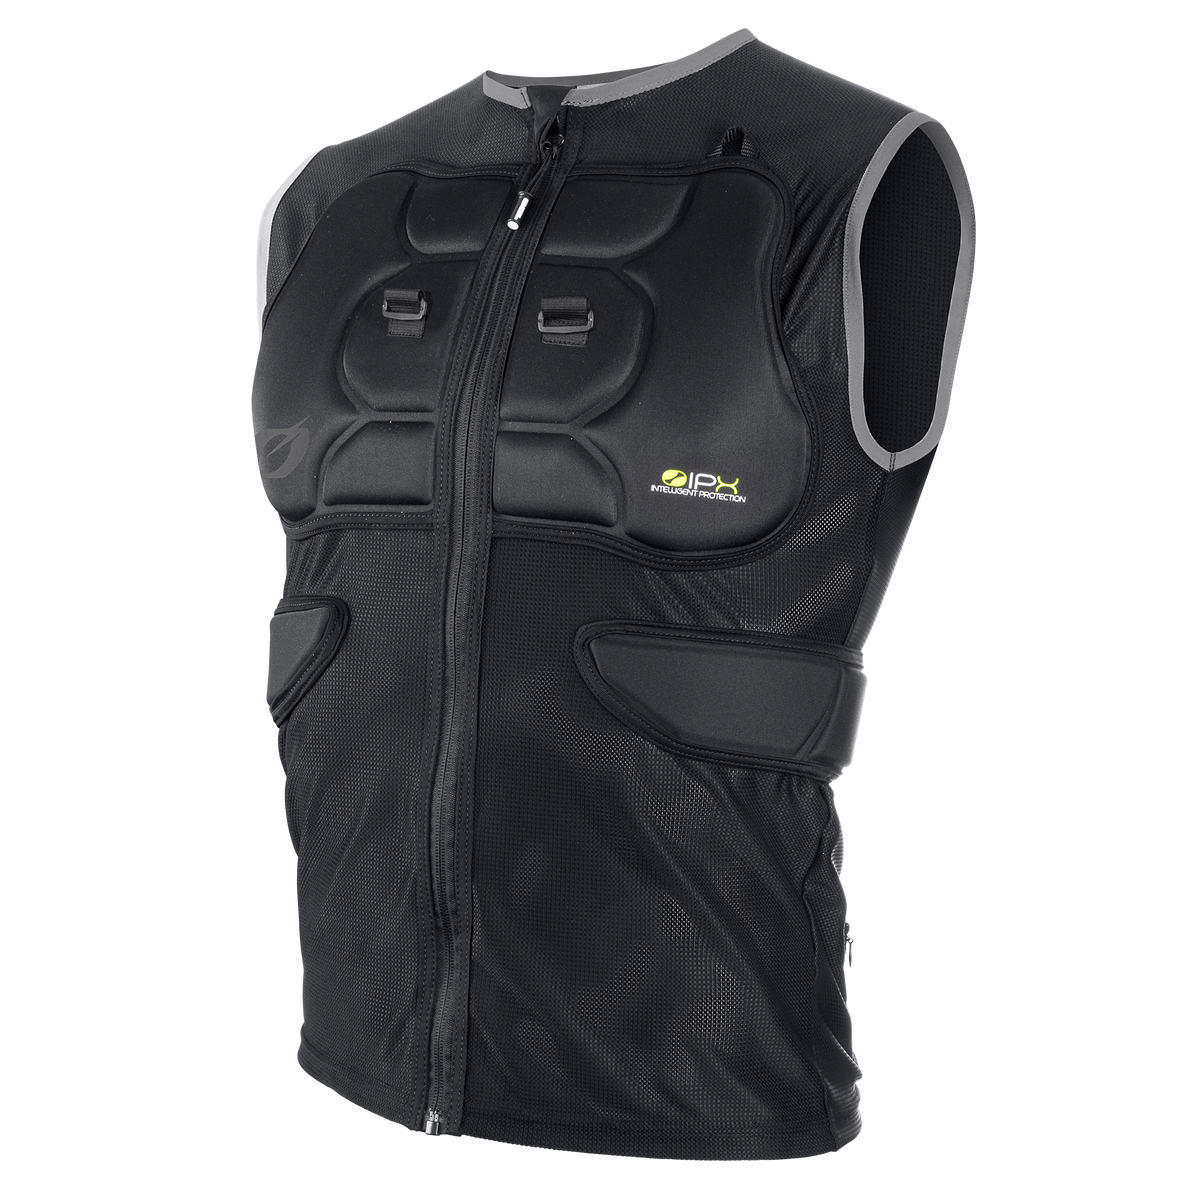 https://cdn.oneal.eu/assets/importedProductImages/PROTECTION/BODY%20ARMOUR/BP%20FAMILY/VEST/black/2021_ONeal_BP_Protector_VEST_black_front.png